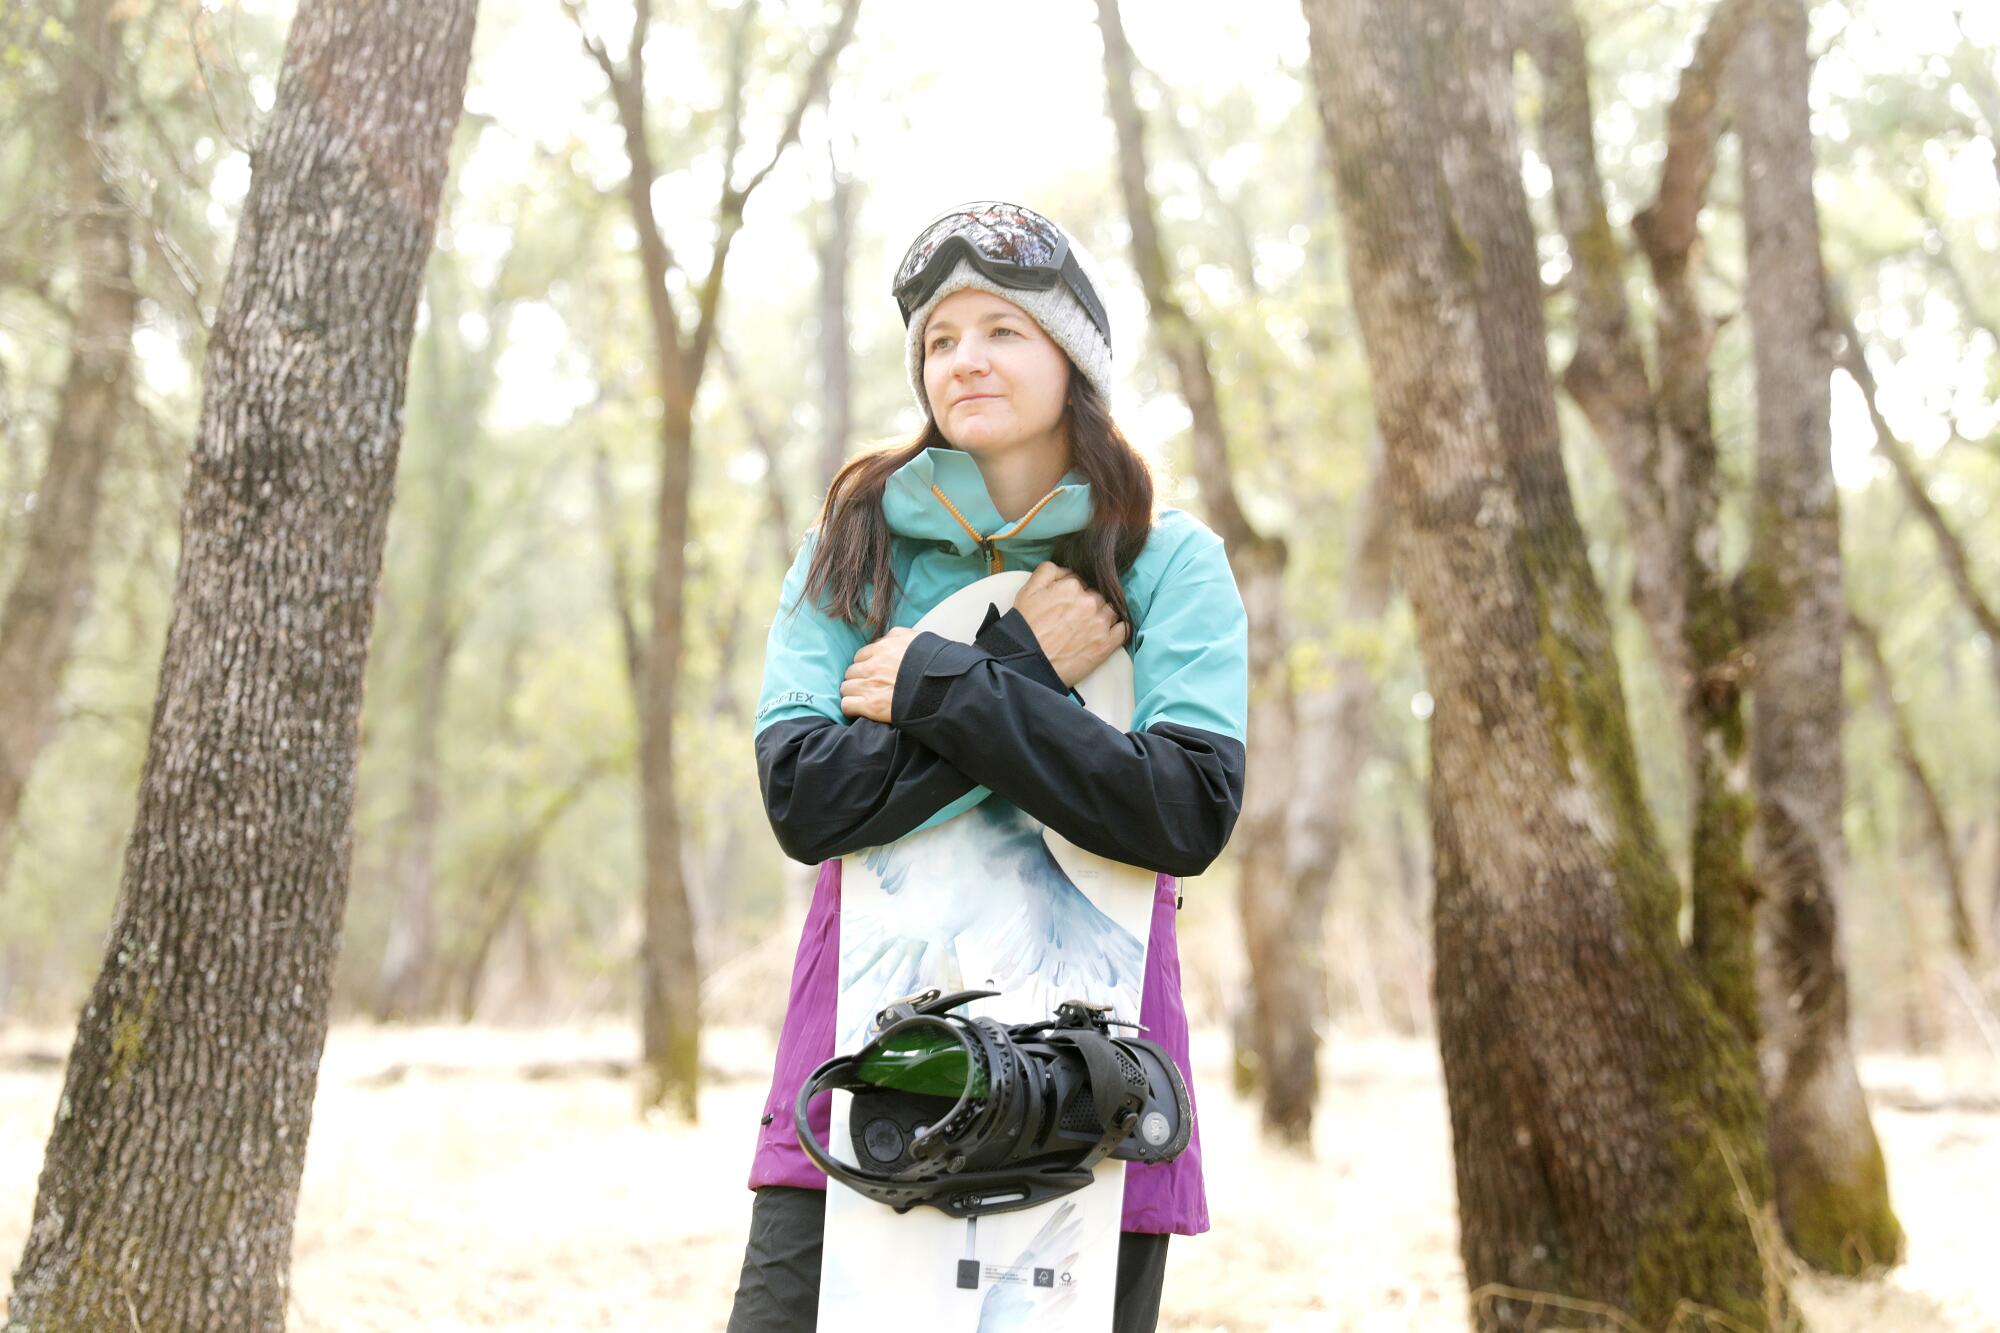 Kelly Clark is photographed in Northern California.